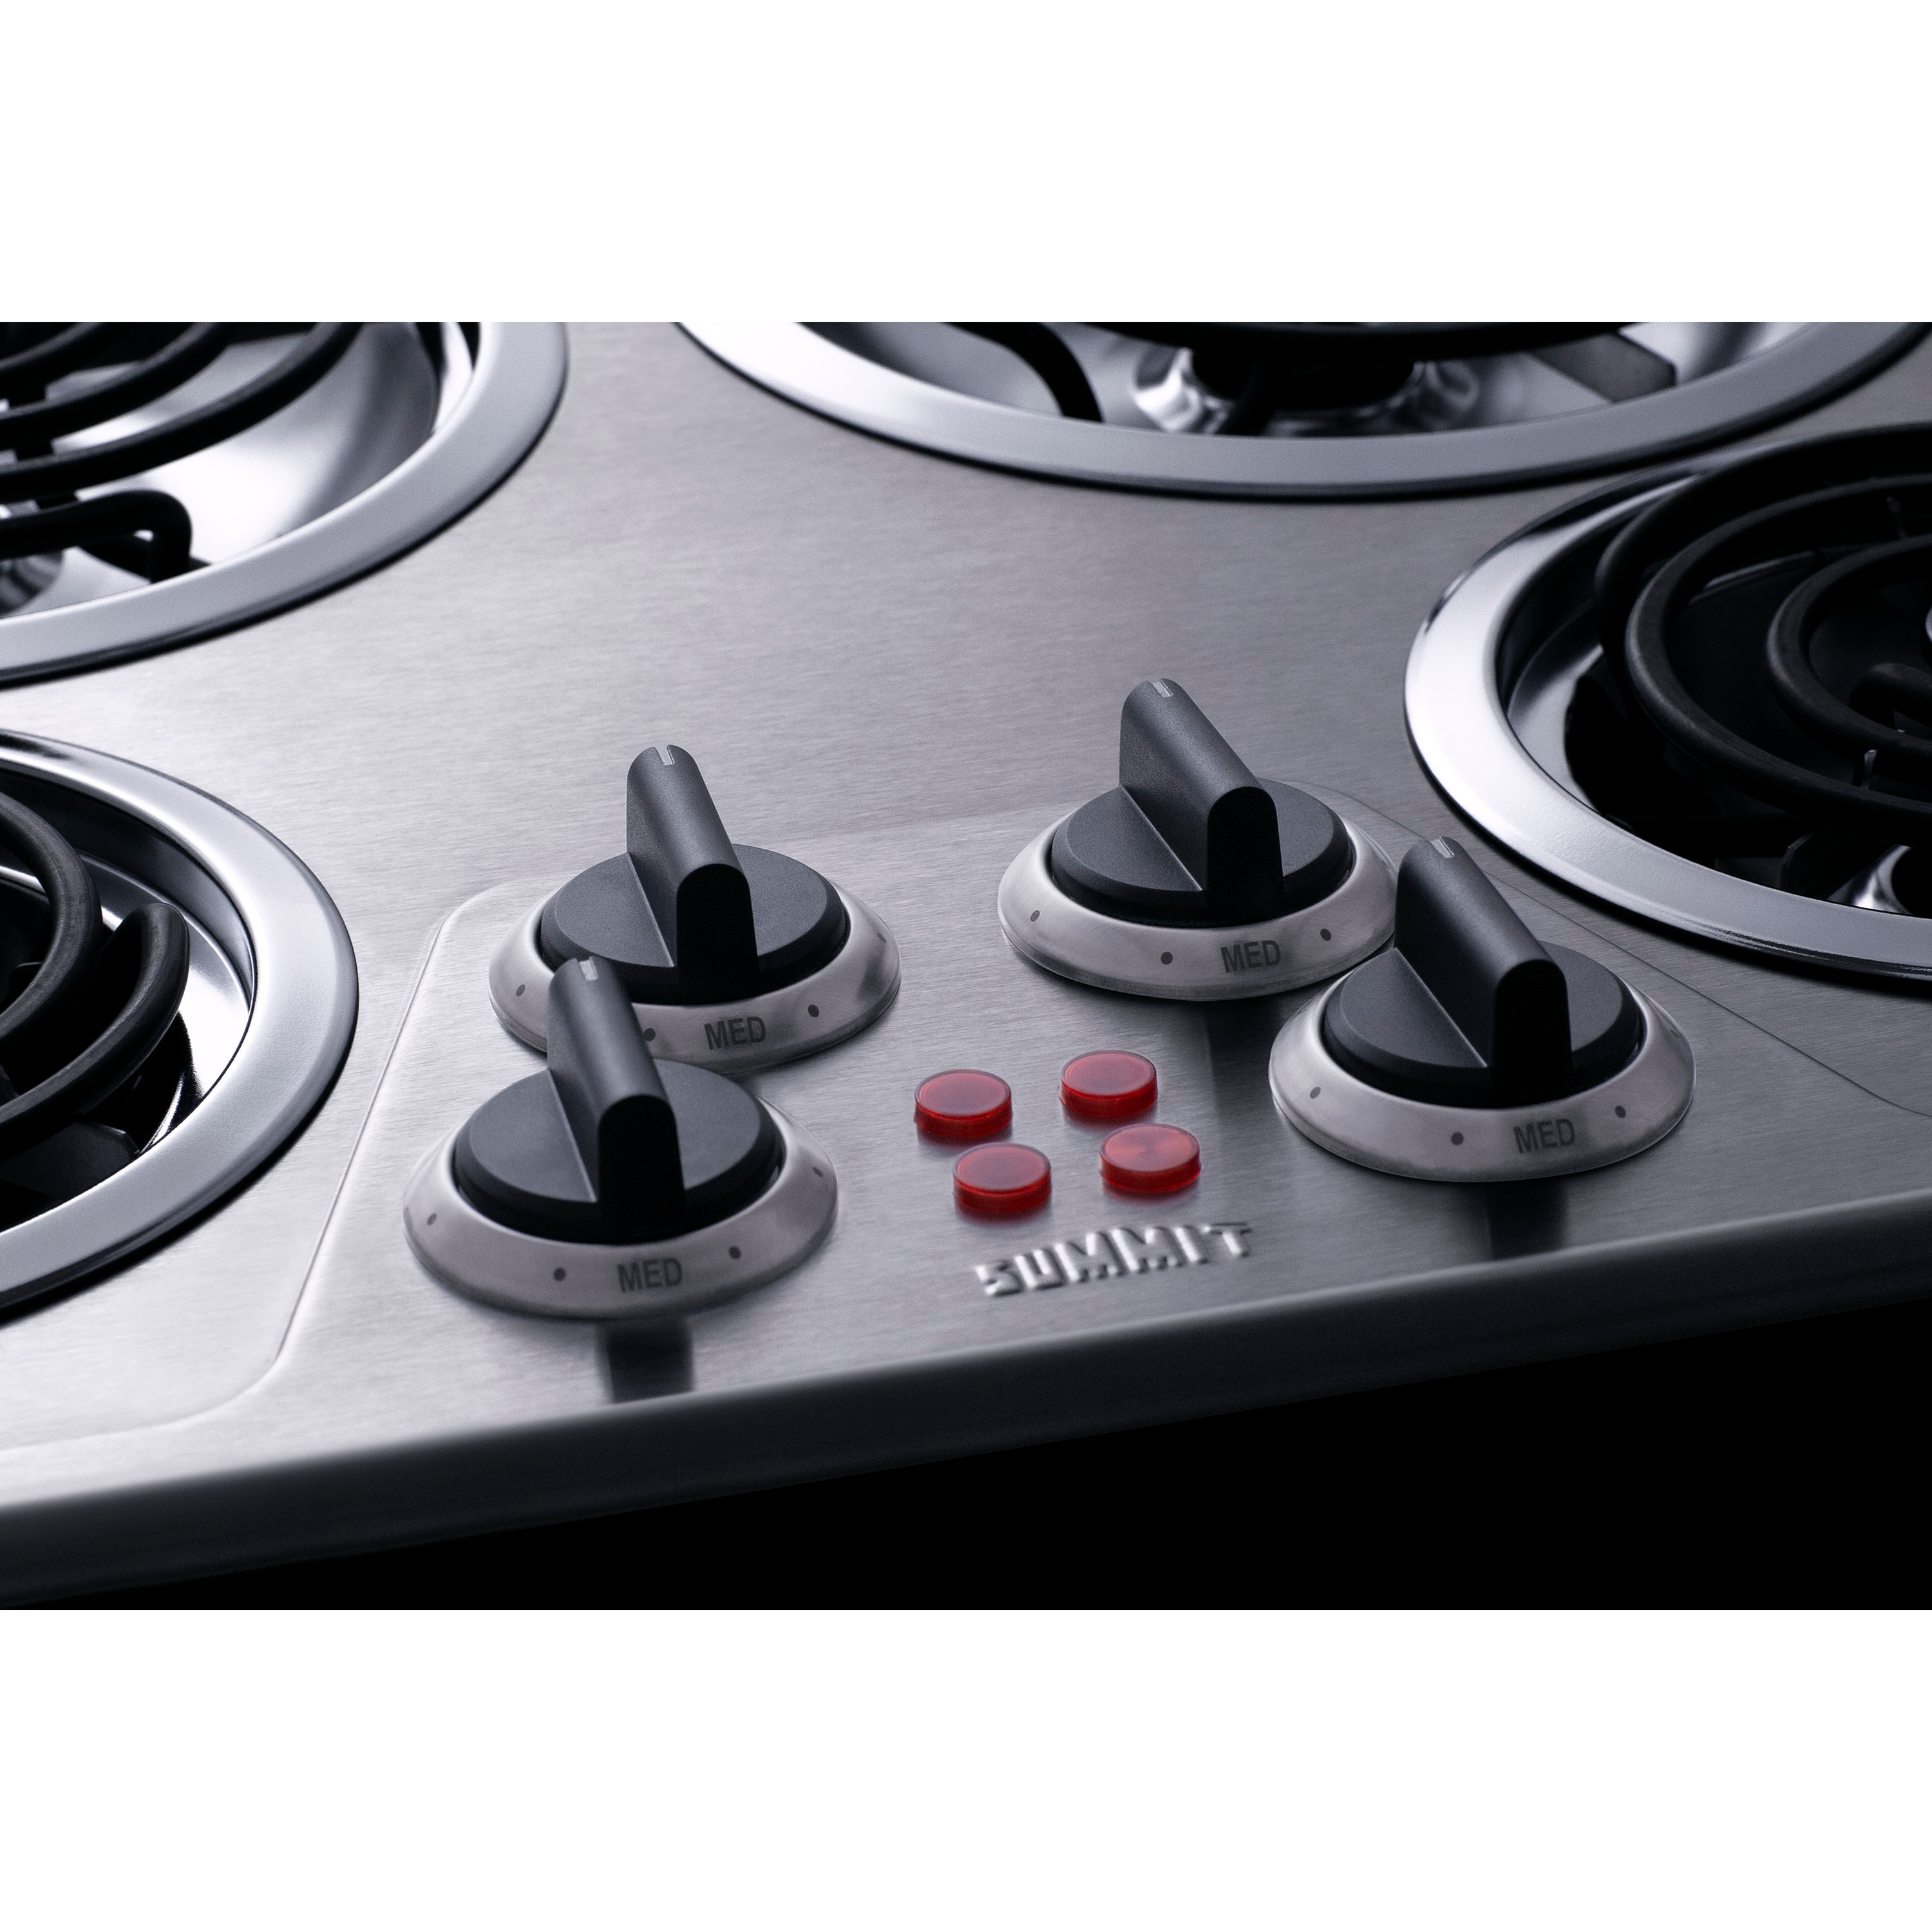 Summit WEL03 24 Inch Electric Cooktop with 4-Coil Elements